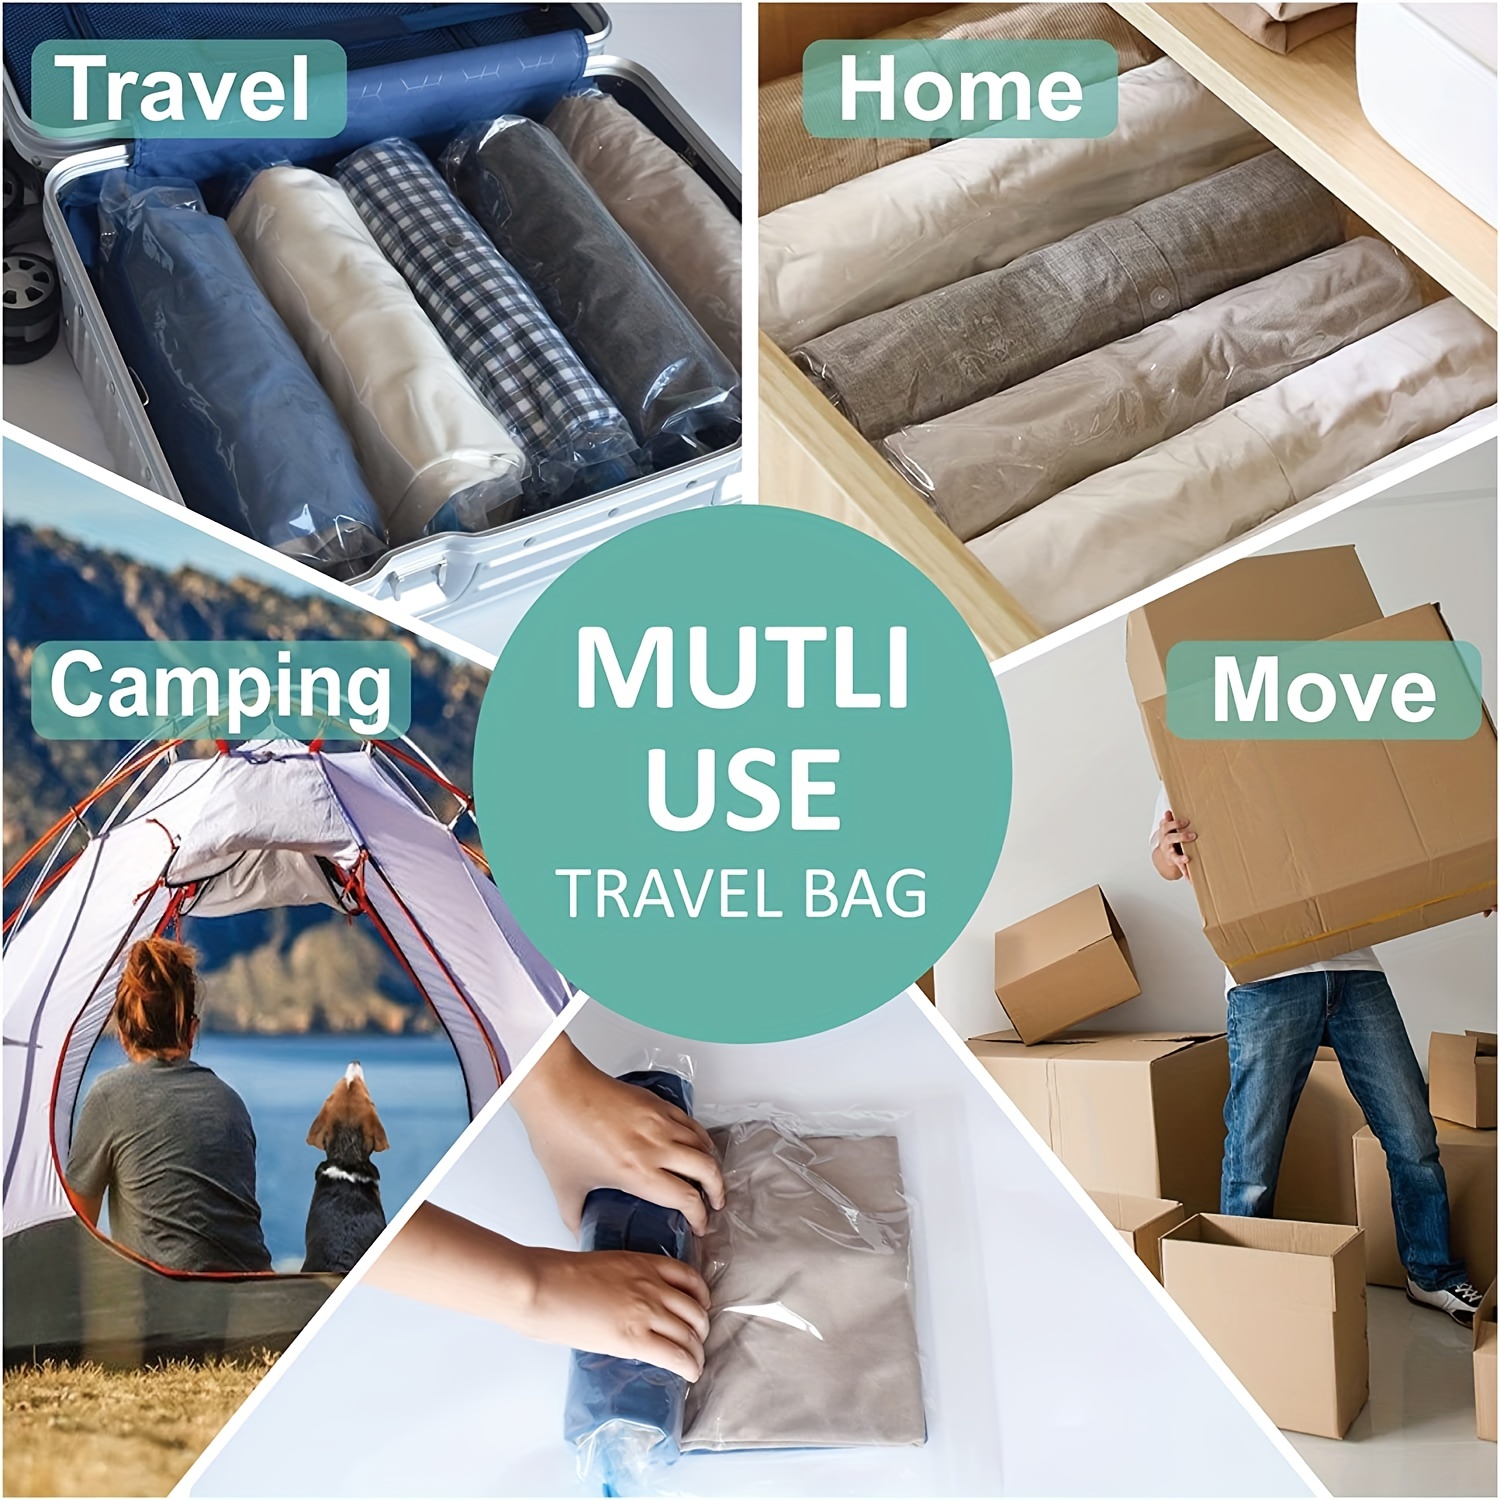  Compression Bags - Travel Accessories - 10 Pack Space Saver Bags  - No Vacuum or Pump Needed - Vacuum Storage Bags for Travel Essentials -  Home Packing-Organizers (Blue) : Home & Kitchen